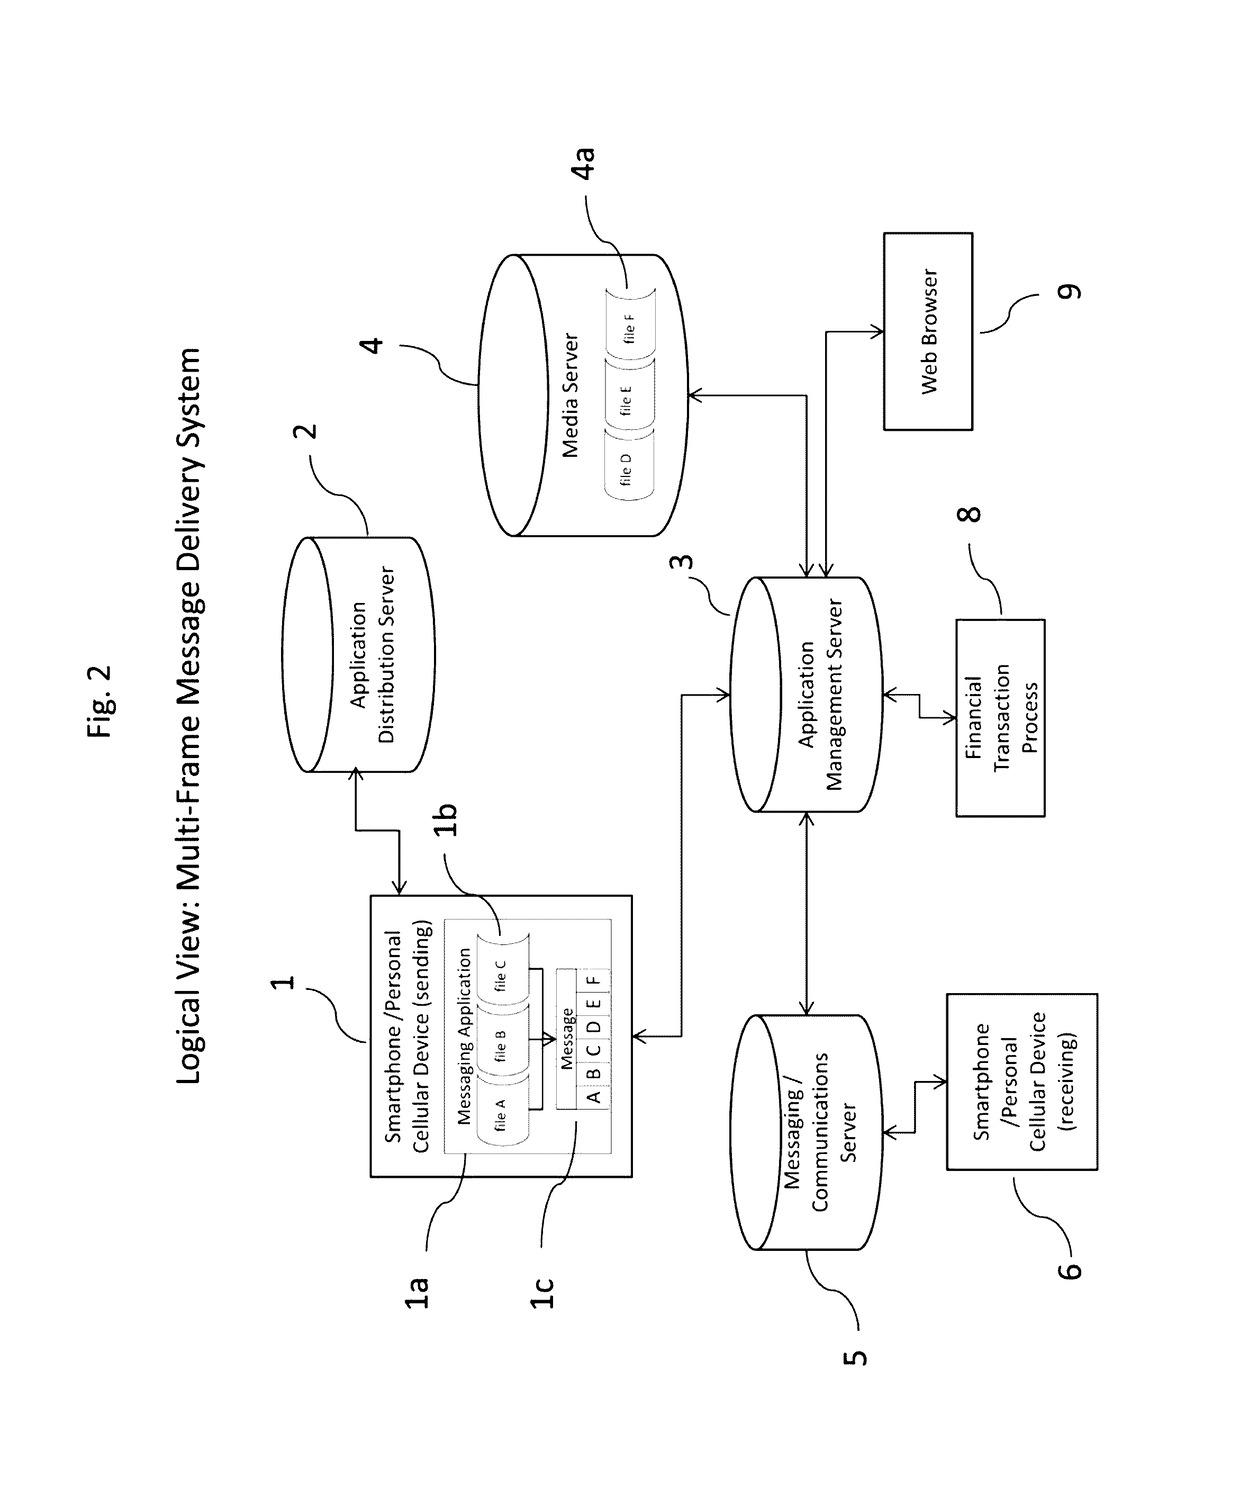 System and method for multi-frame message exchange between personal mobile devices